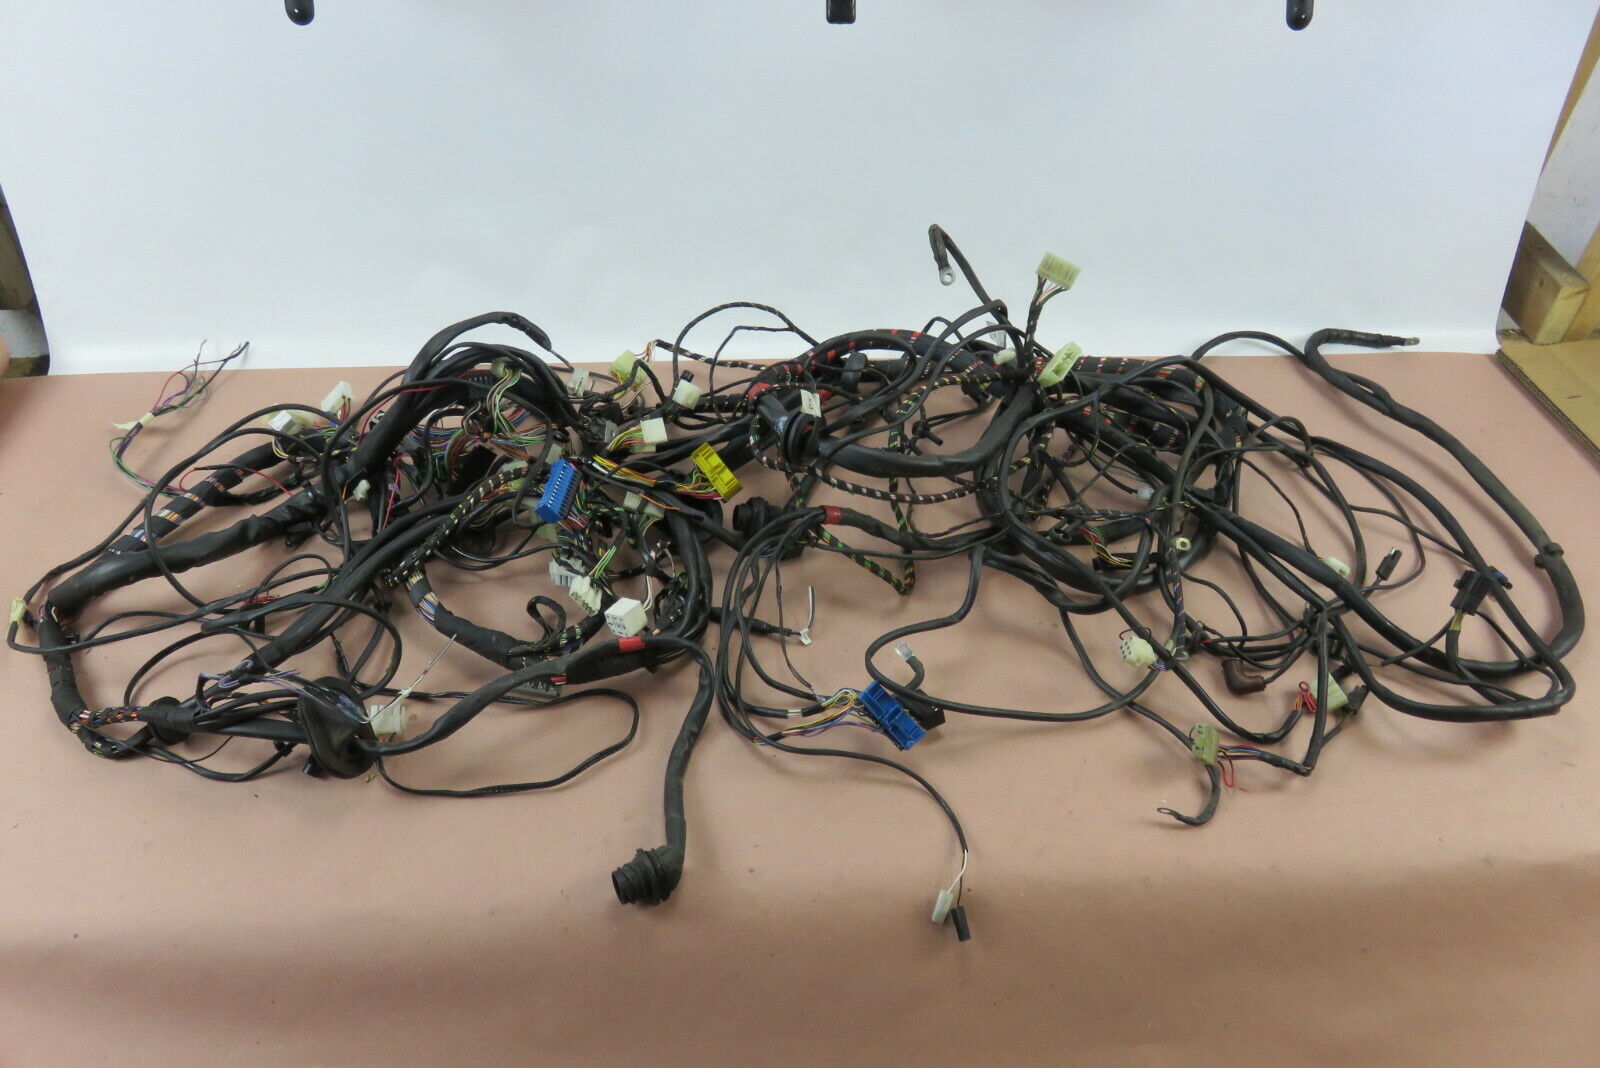 94 Ferrari 348 wiring harness cable rear end